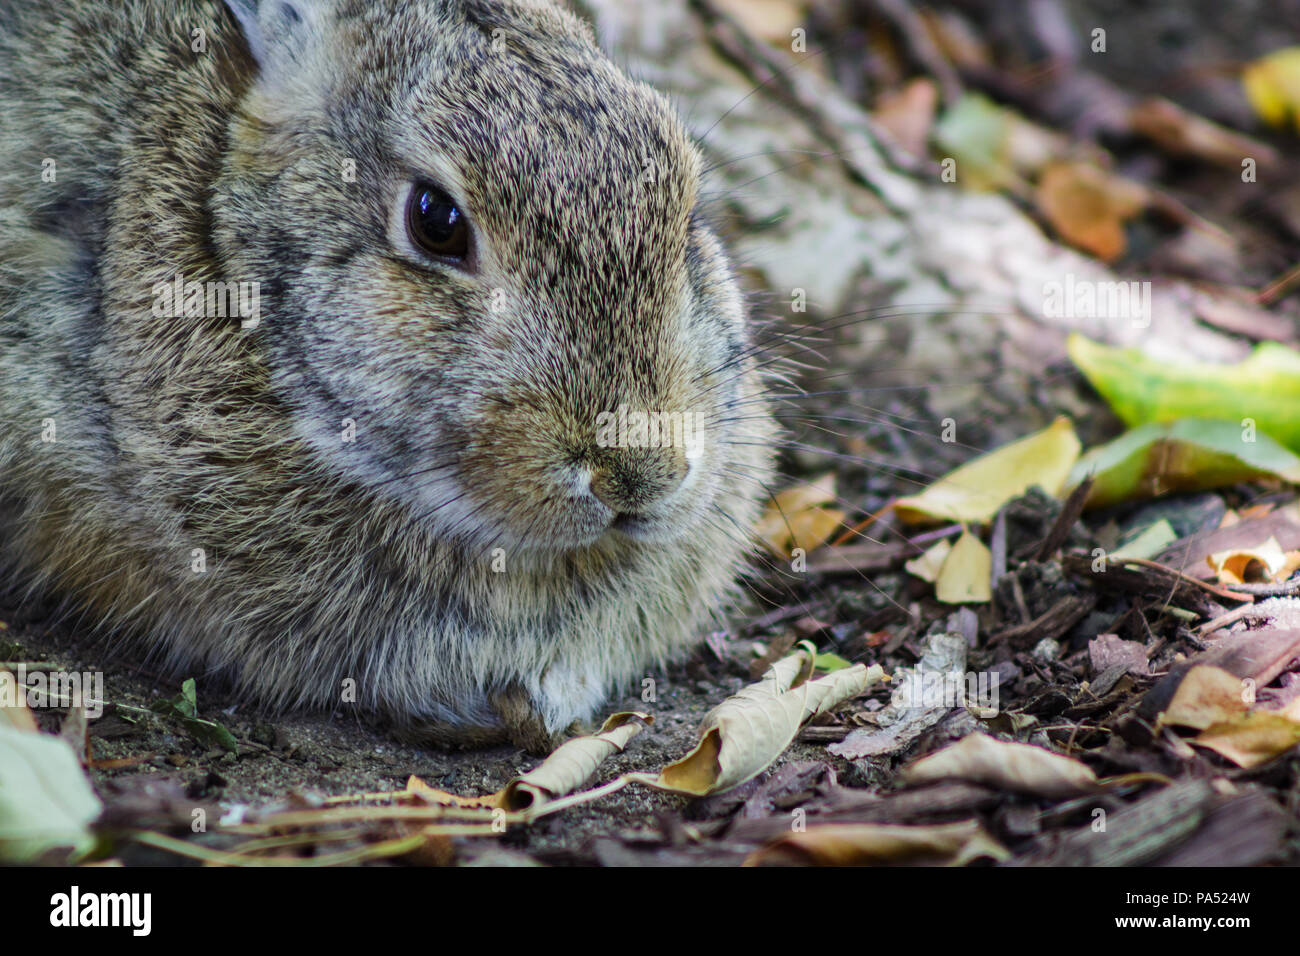 Close up of a cute bunny rabbit at the base of a tree Stock Photo